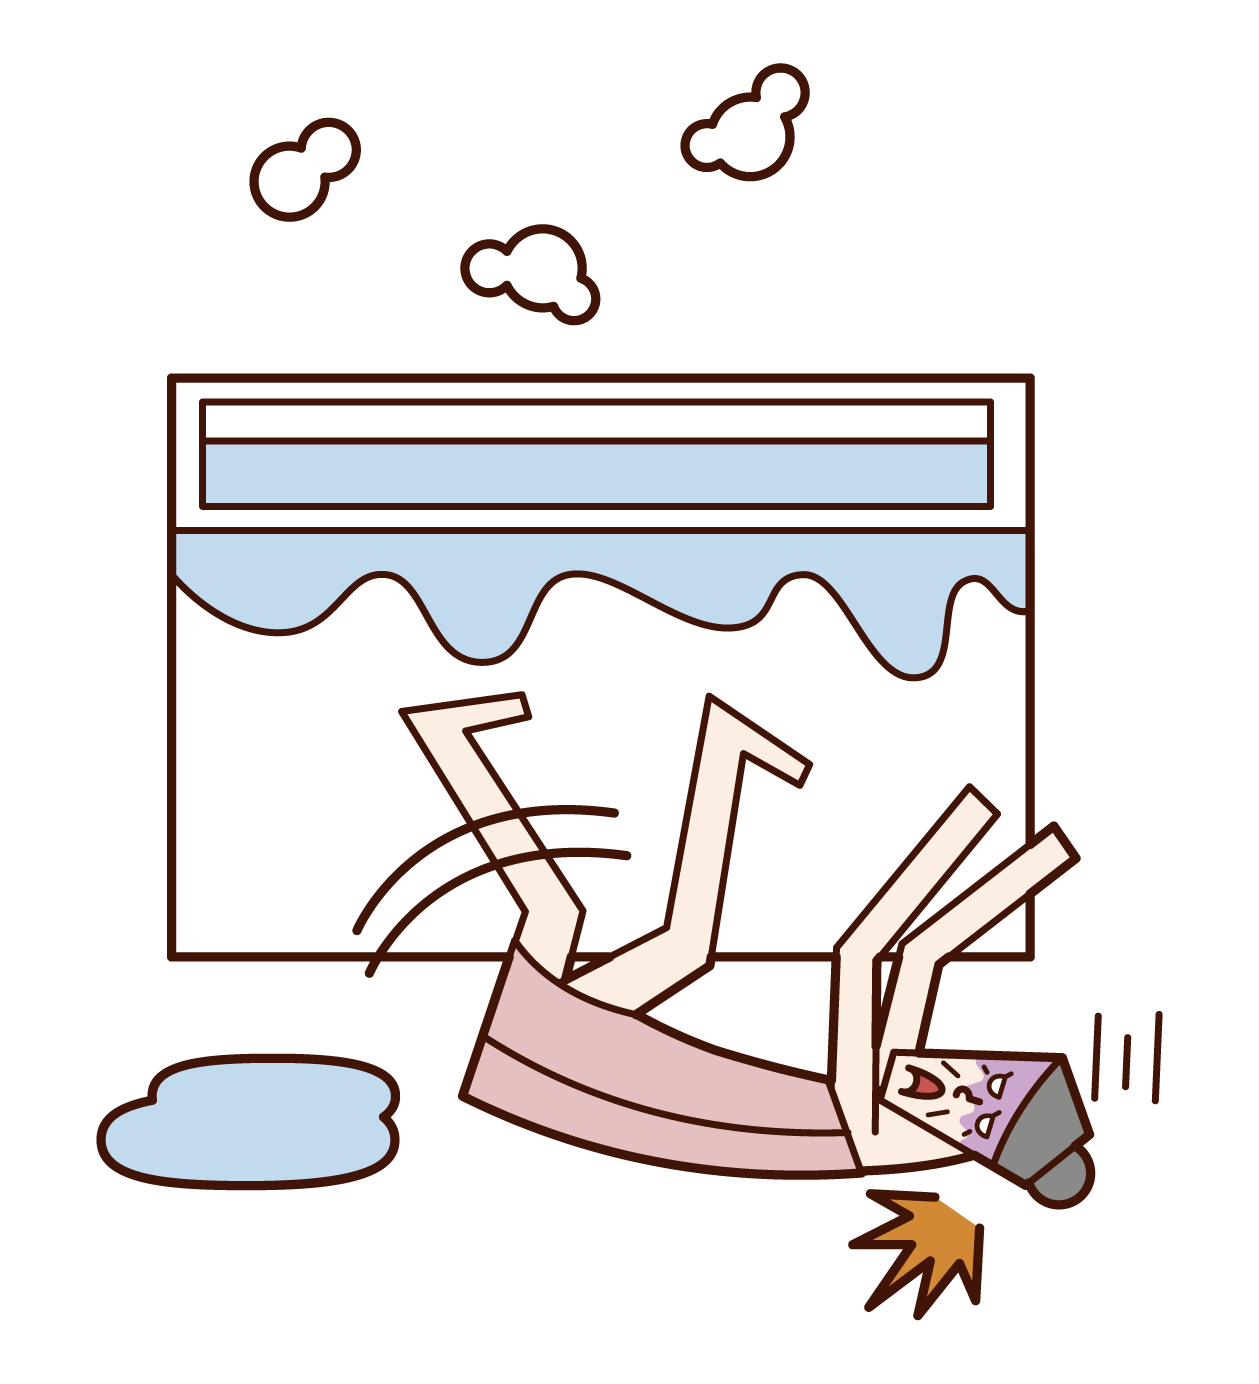 Illustration of a person (old man) falling in the bathroom